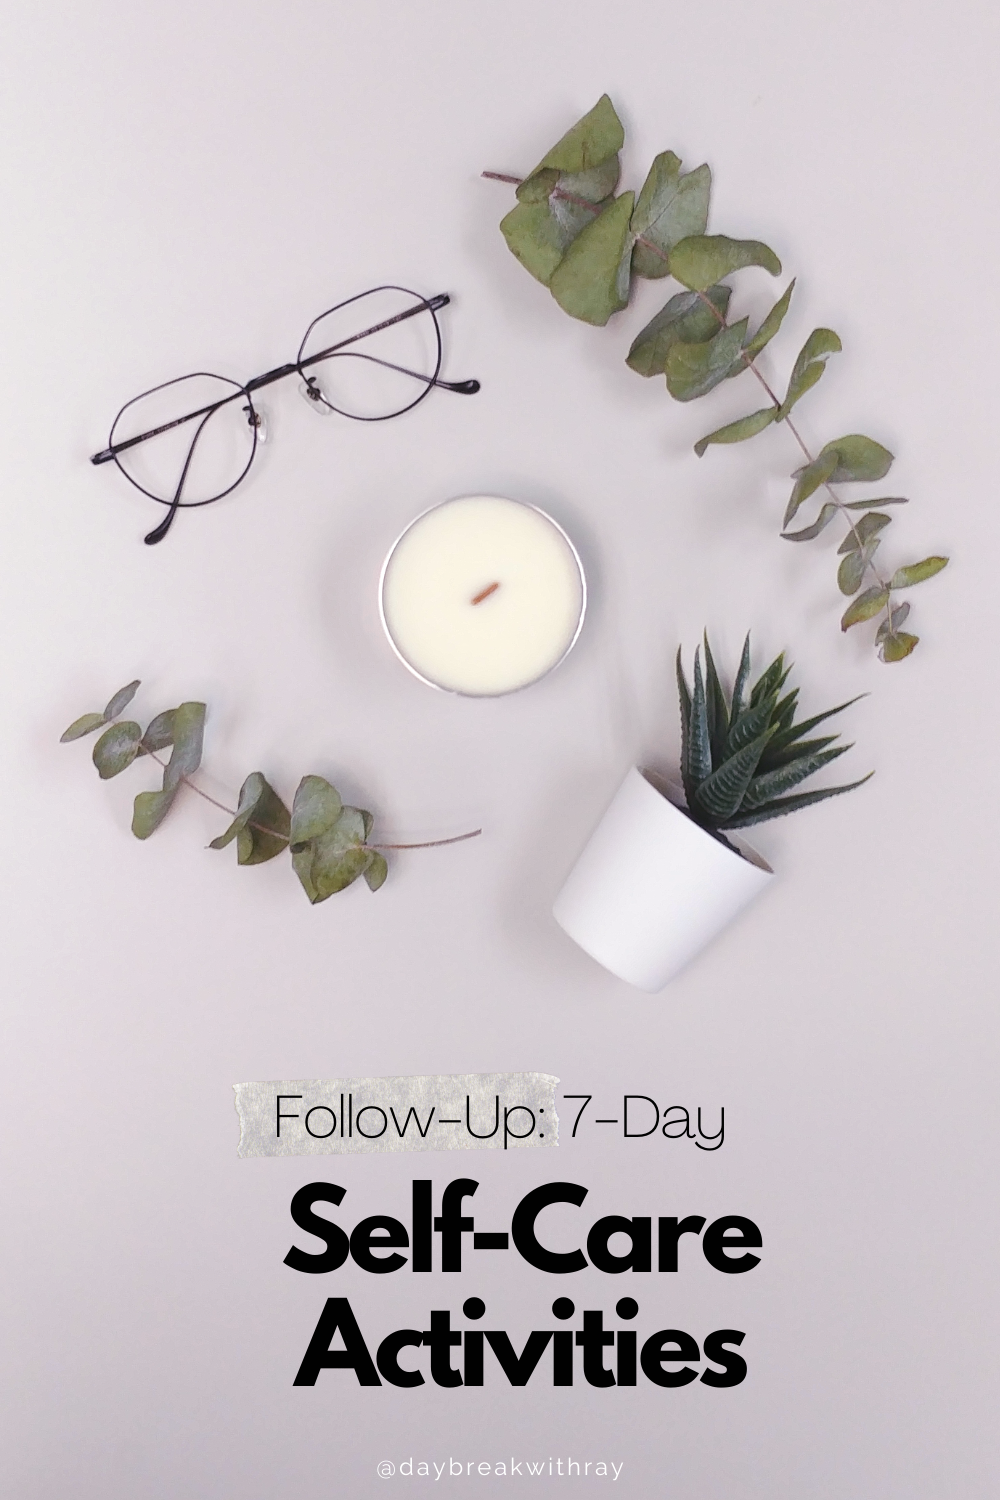 Follow-up 7-Day Self-Care Activities to Reward Yourself